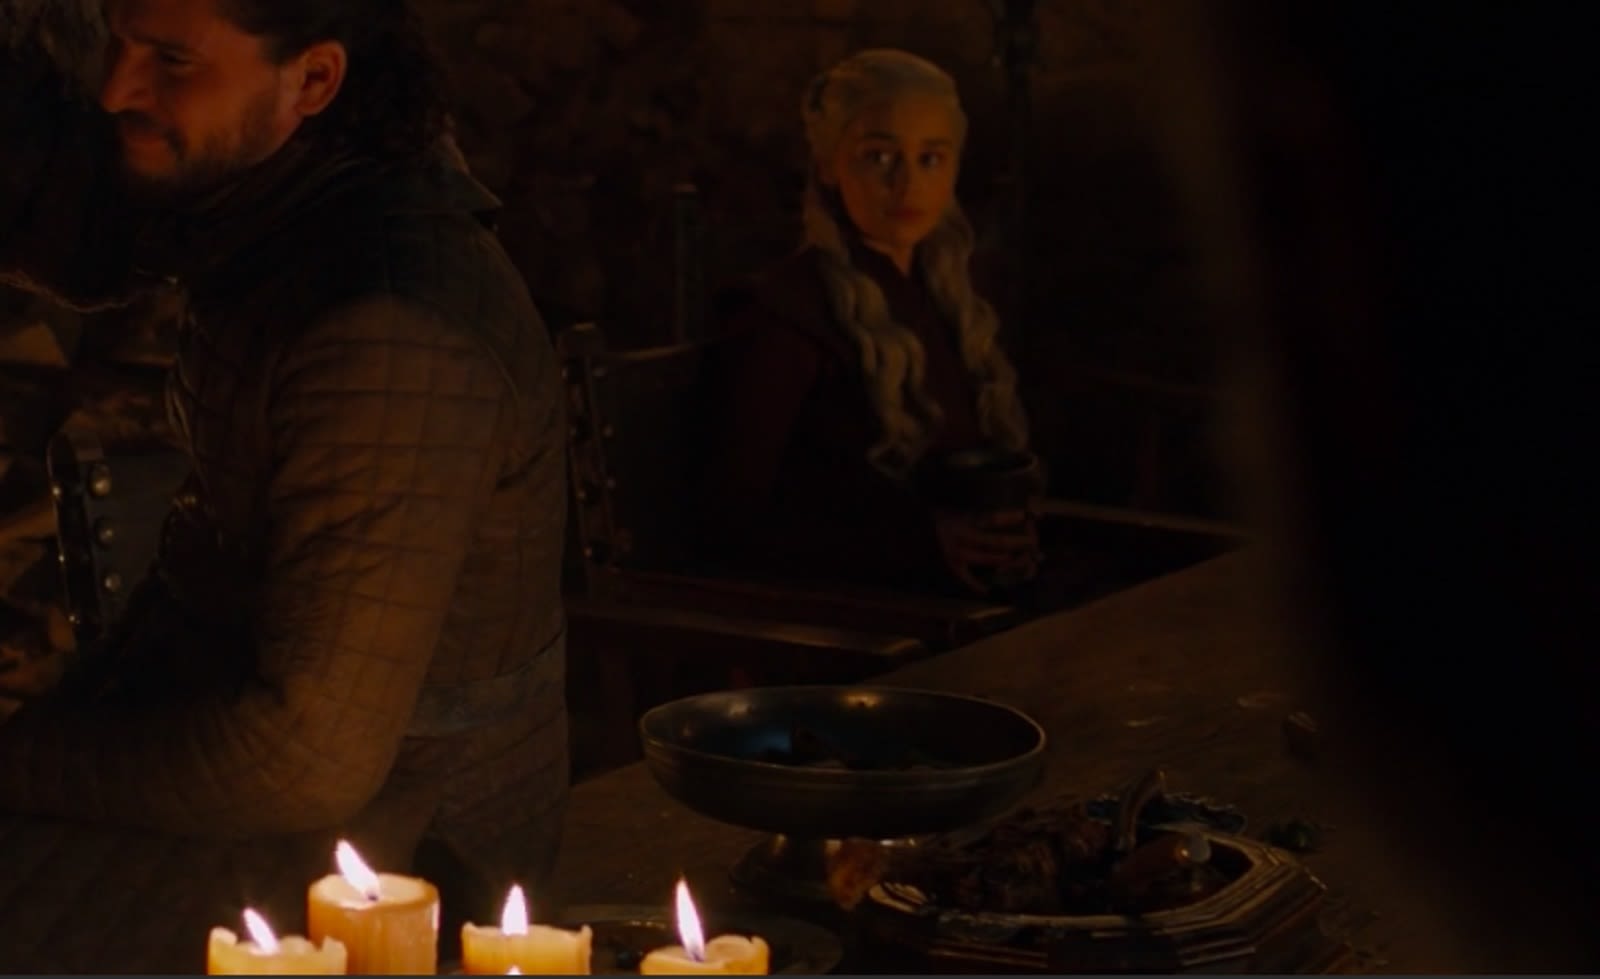 Game of Thrones': That random coffee cup's cameo was short-lived |